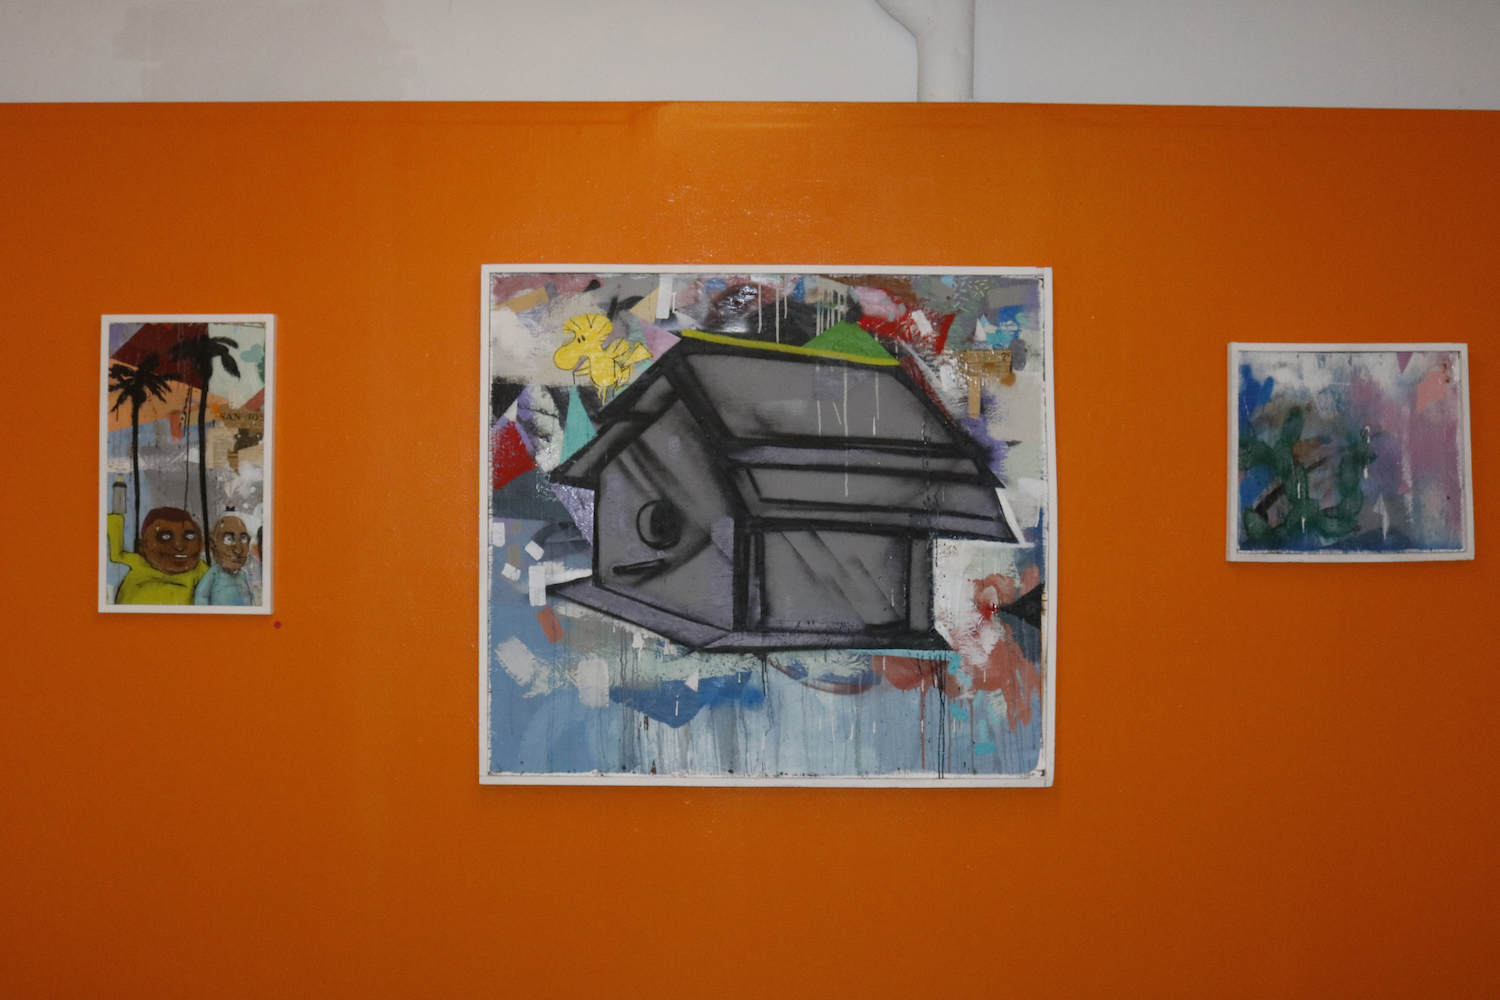 The main wall for Force129's exhibiton in May of 2019.